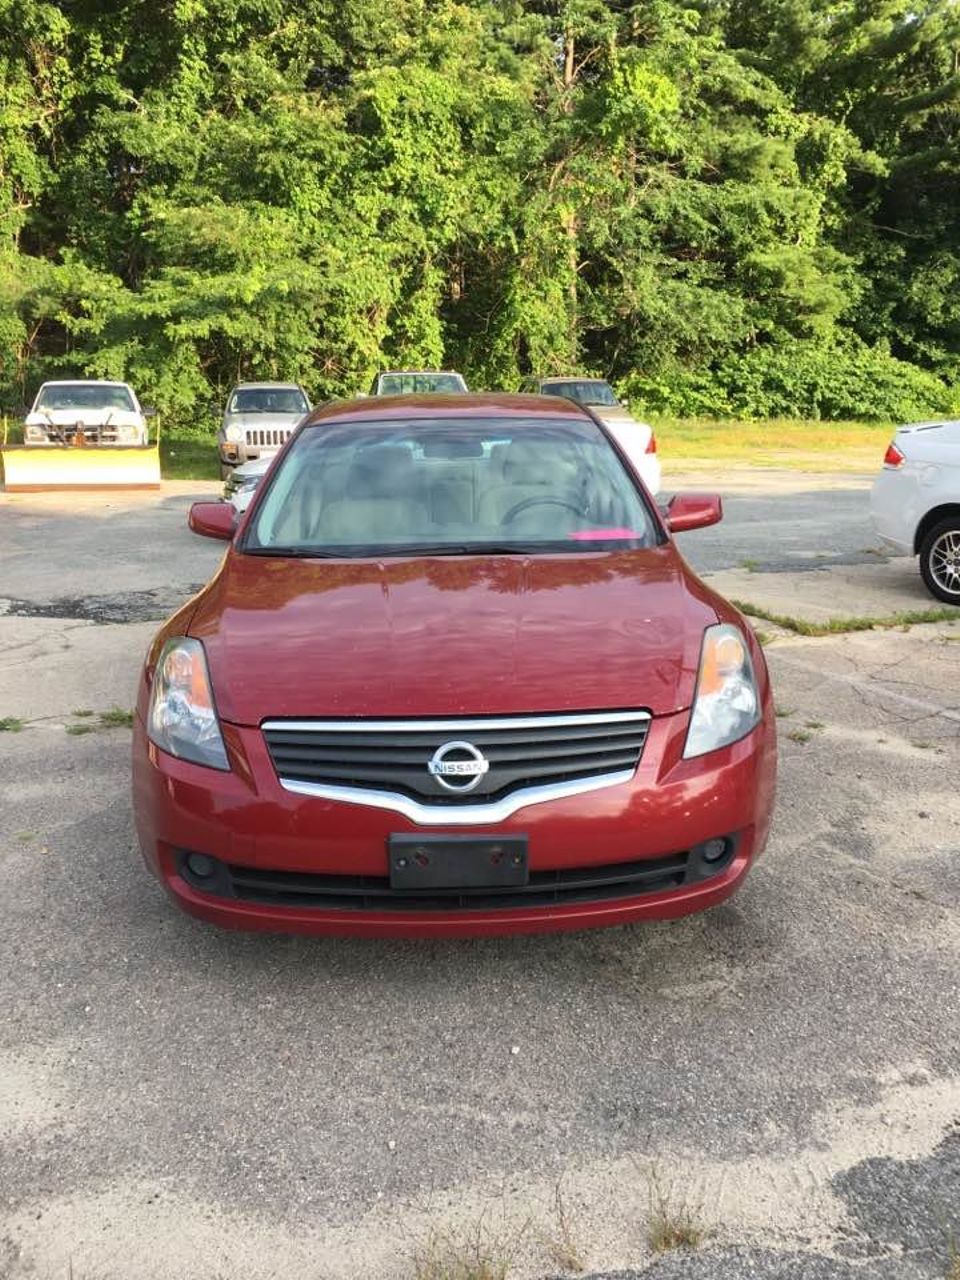 2008 Nissan Altima 2.5 S | Carver, MA, Code Red (Red & Orange), Front Wheel